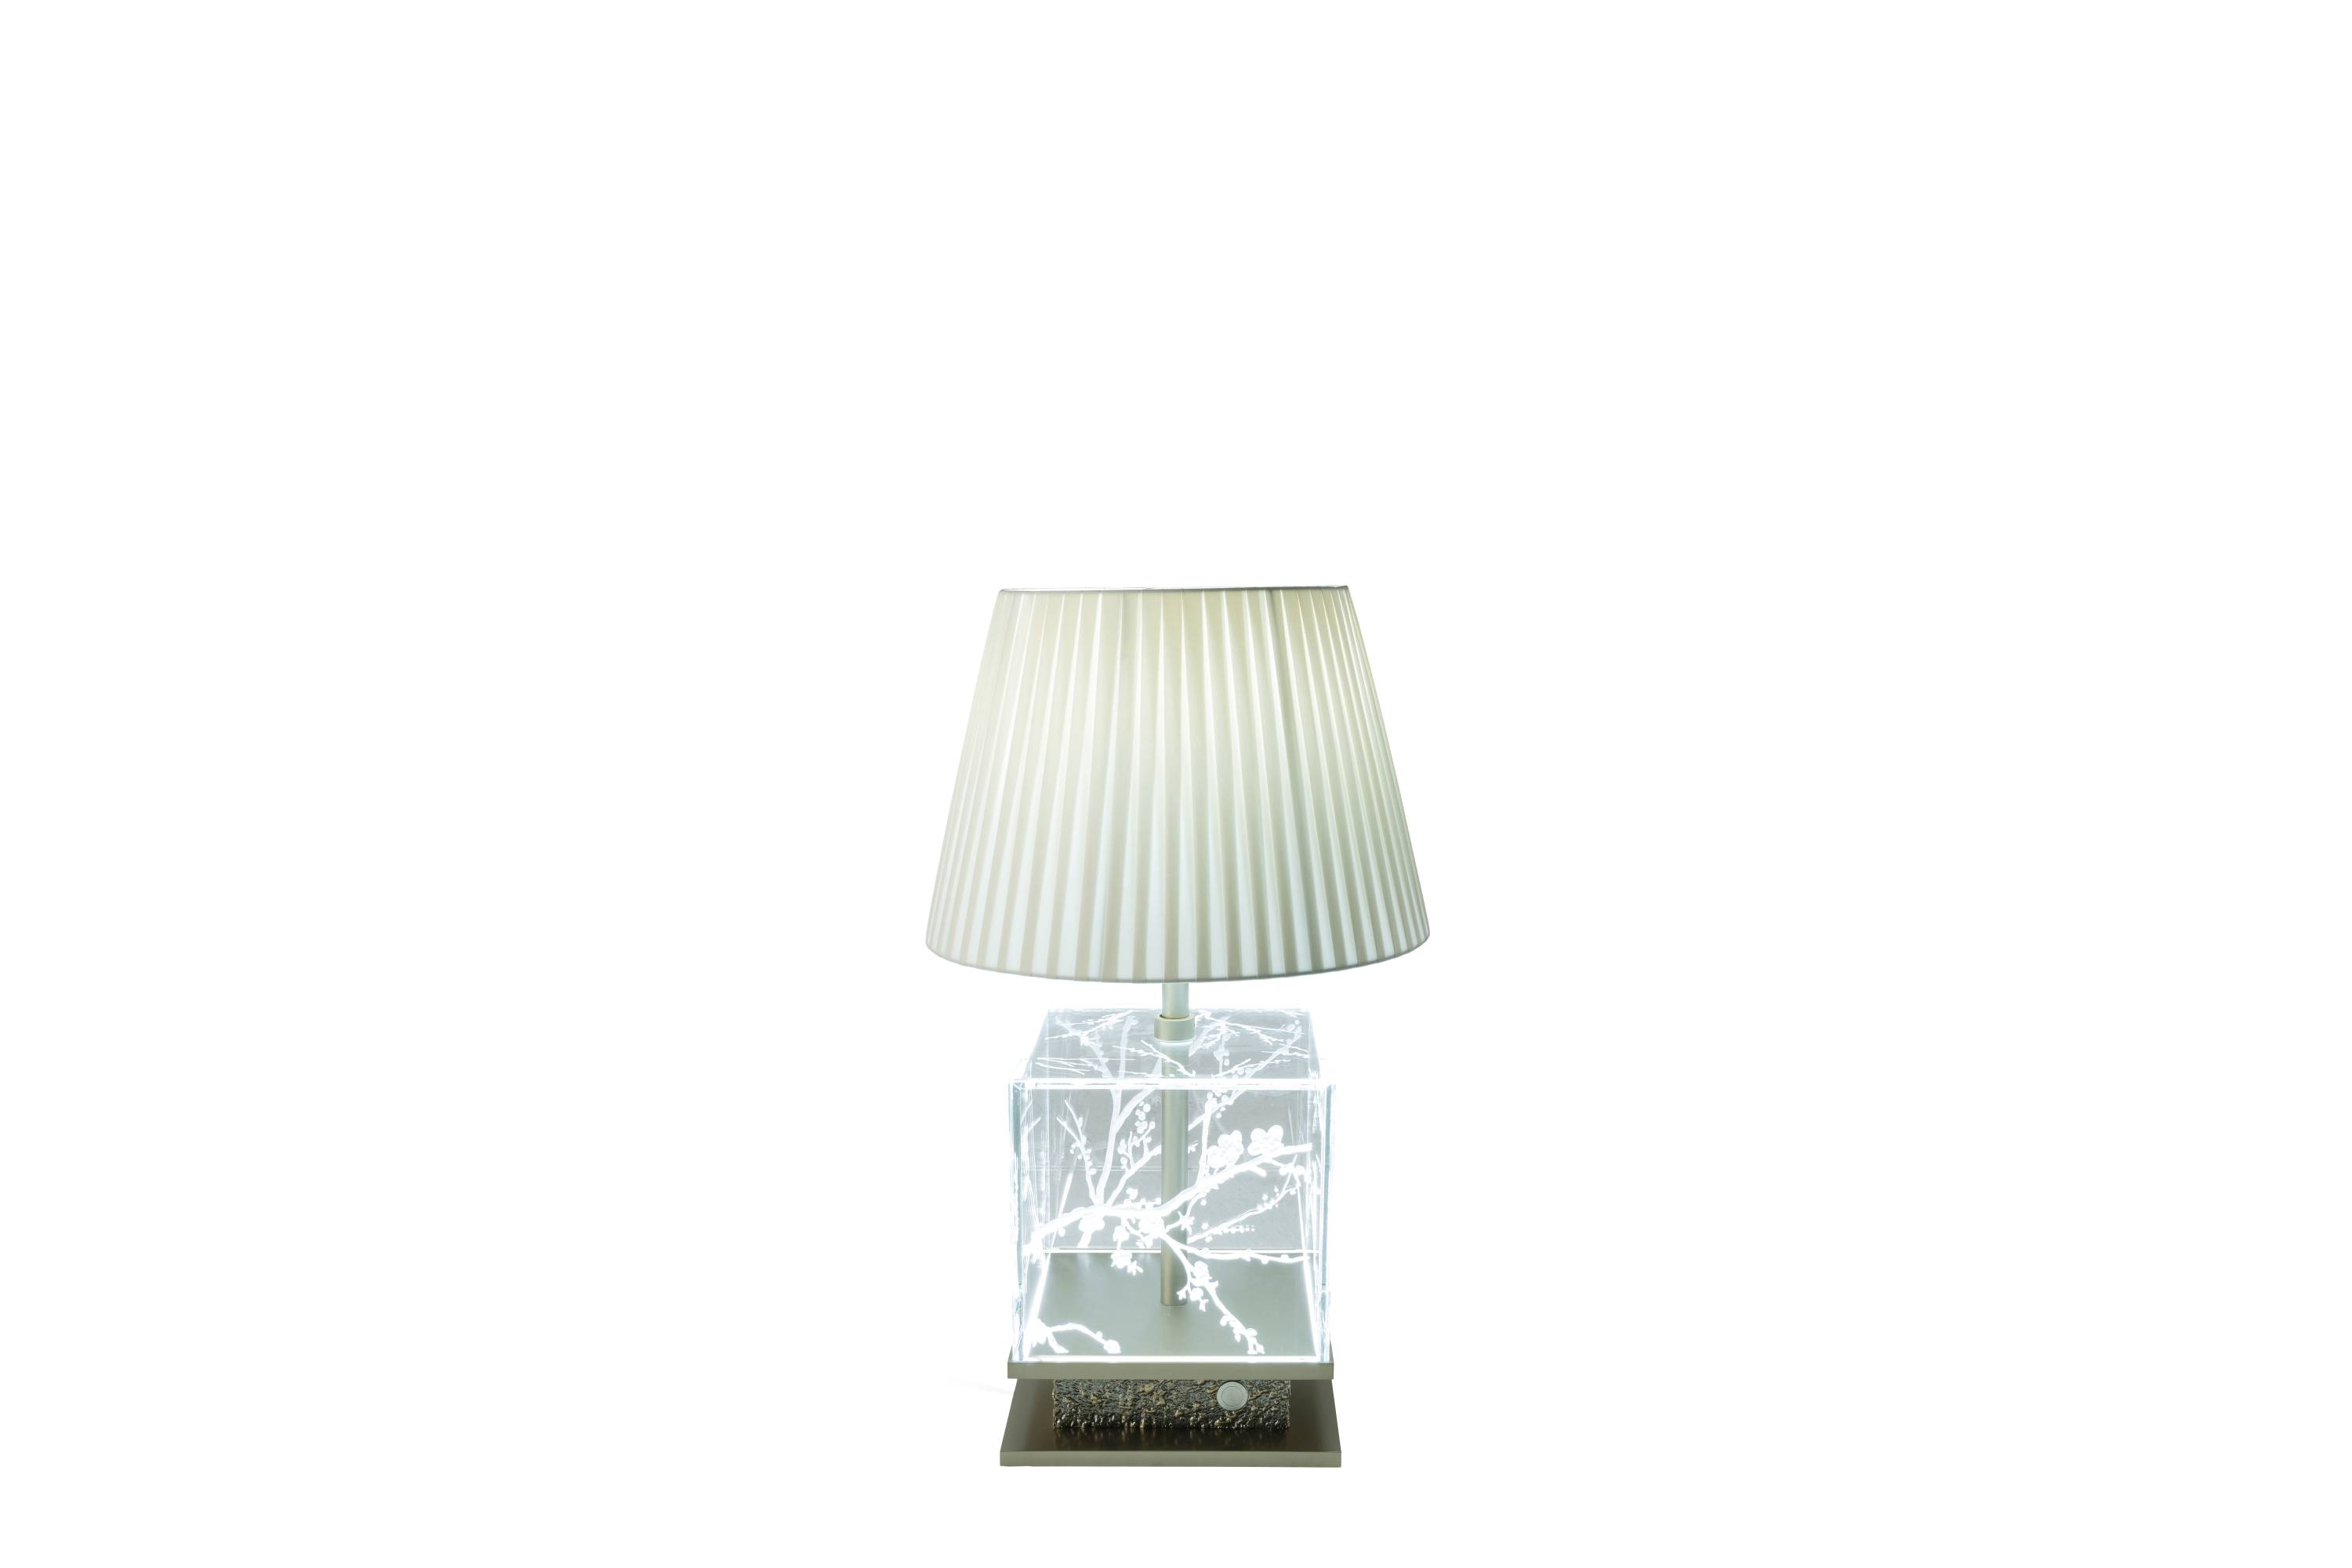 FUJI table lamp – Transform your space with luxury Made in Italy classic lights of Héritage collection.